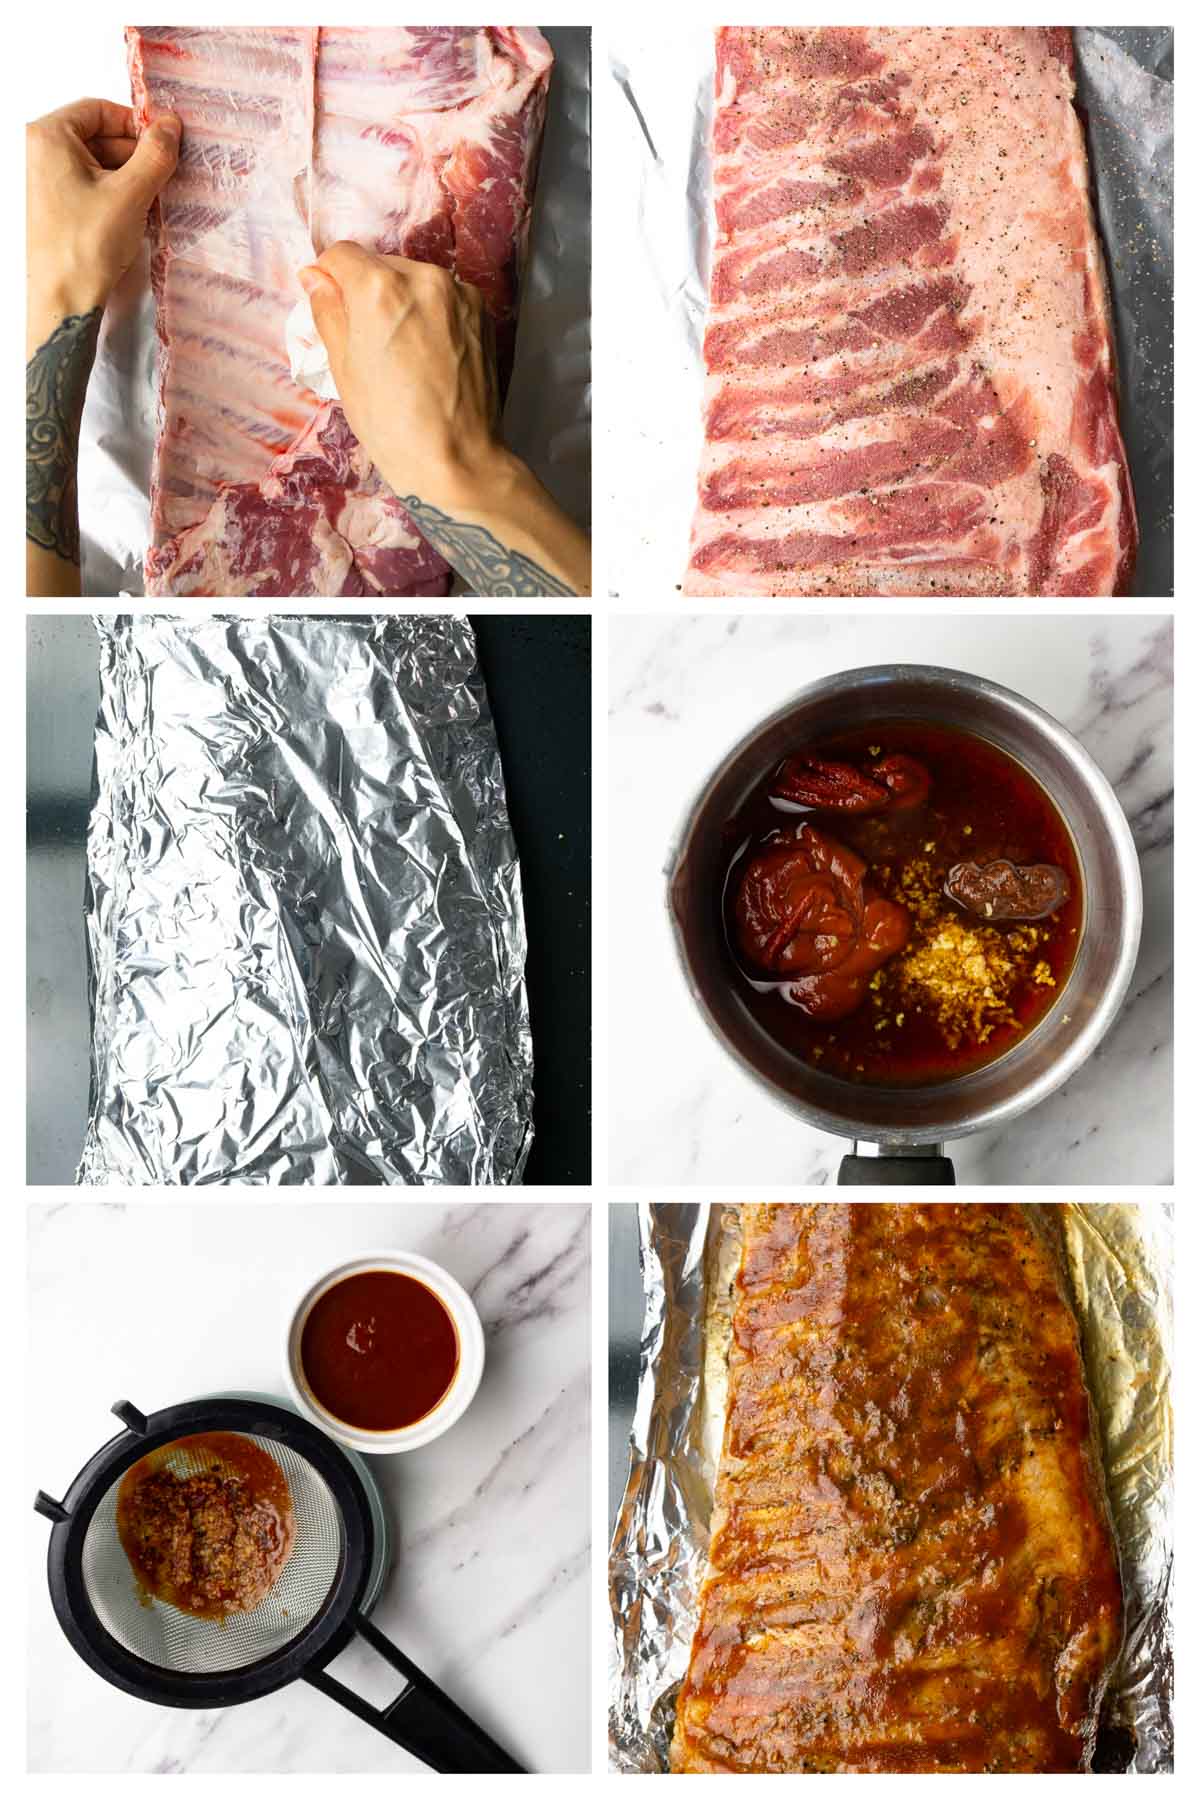 6 images showing step by step directions to make oven-baked BBQ keto ribs.